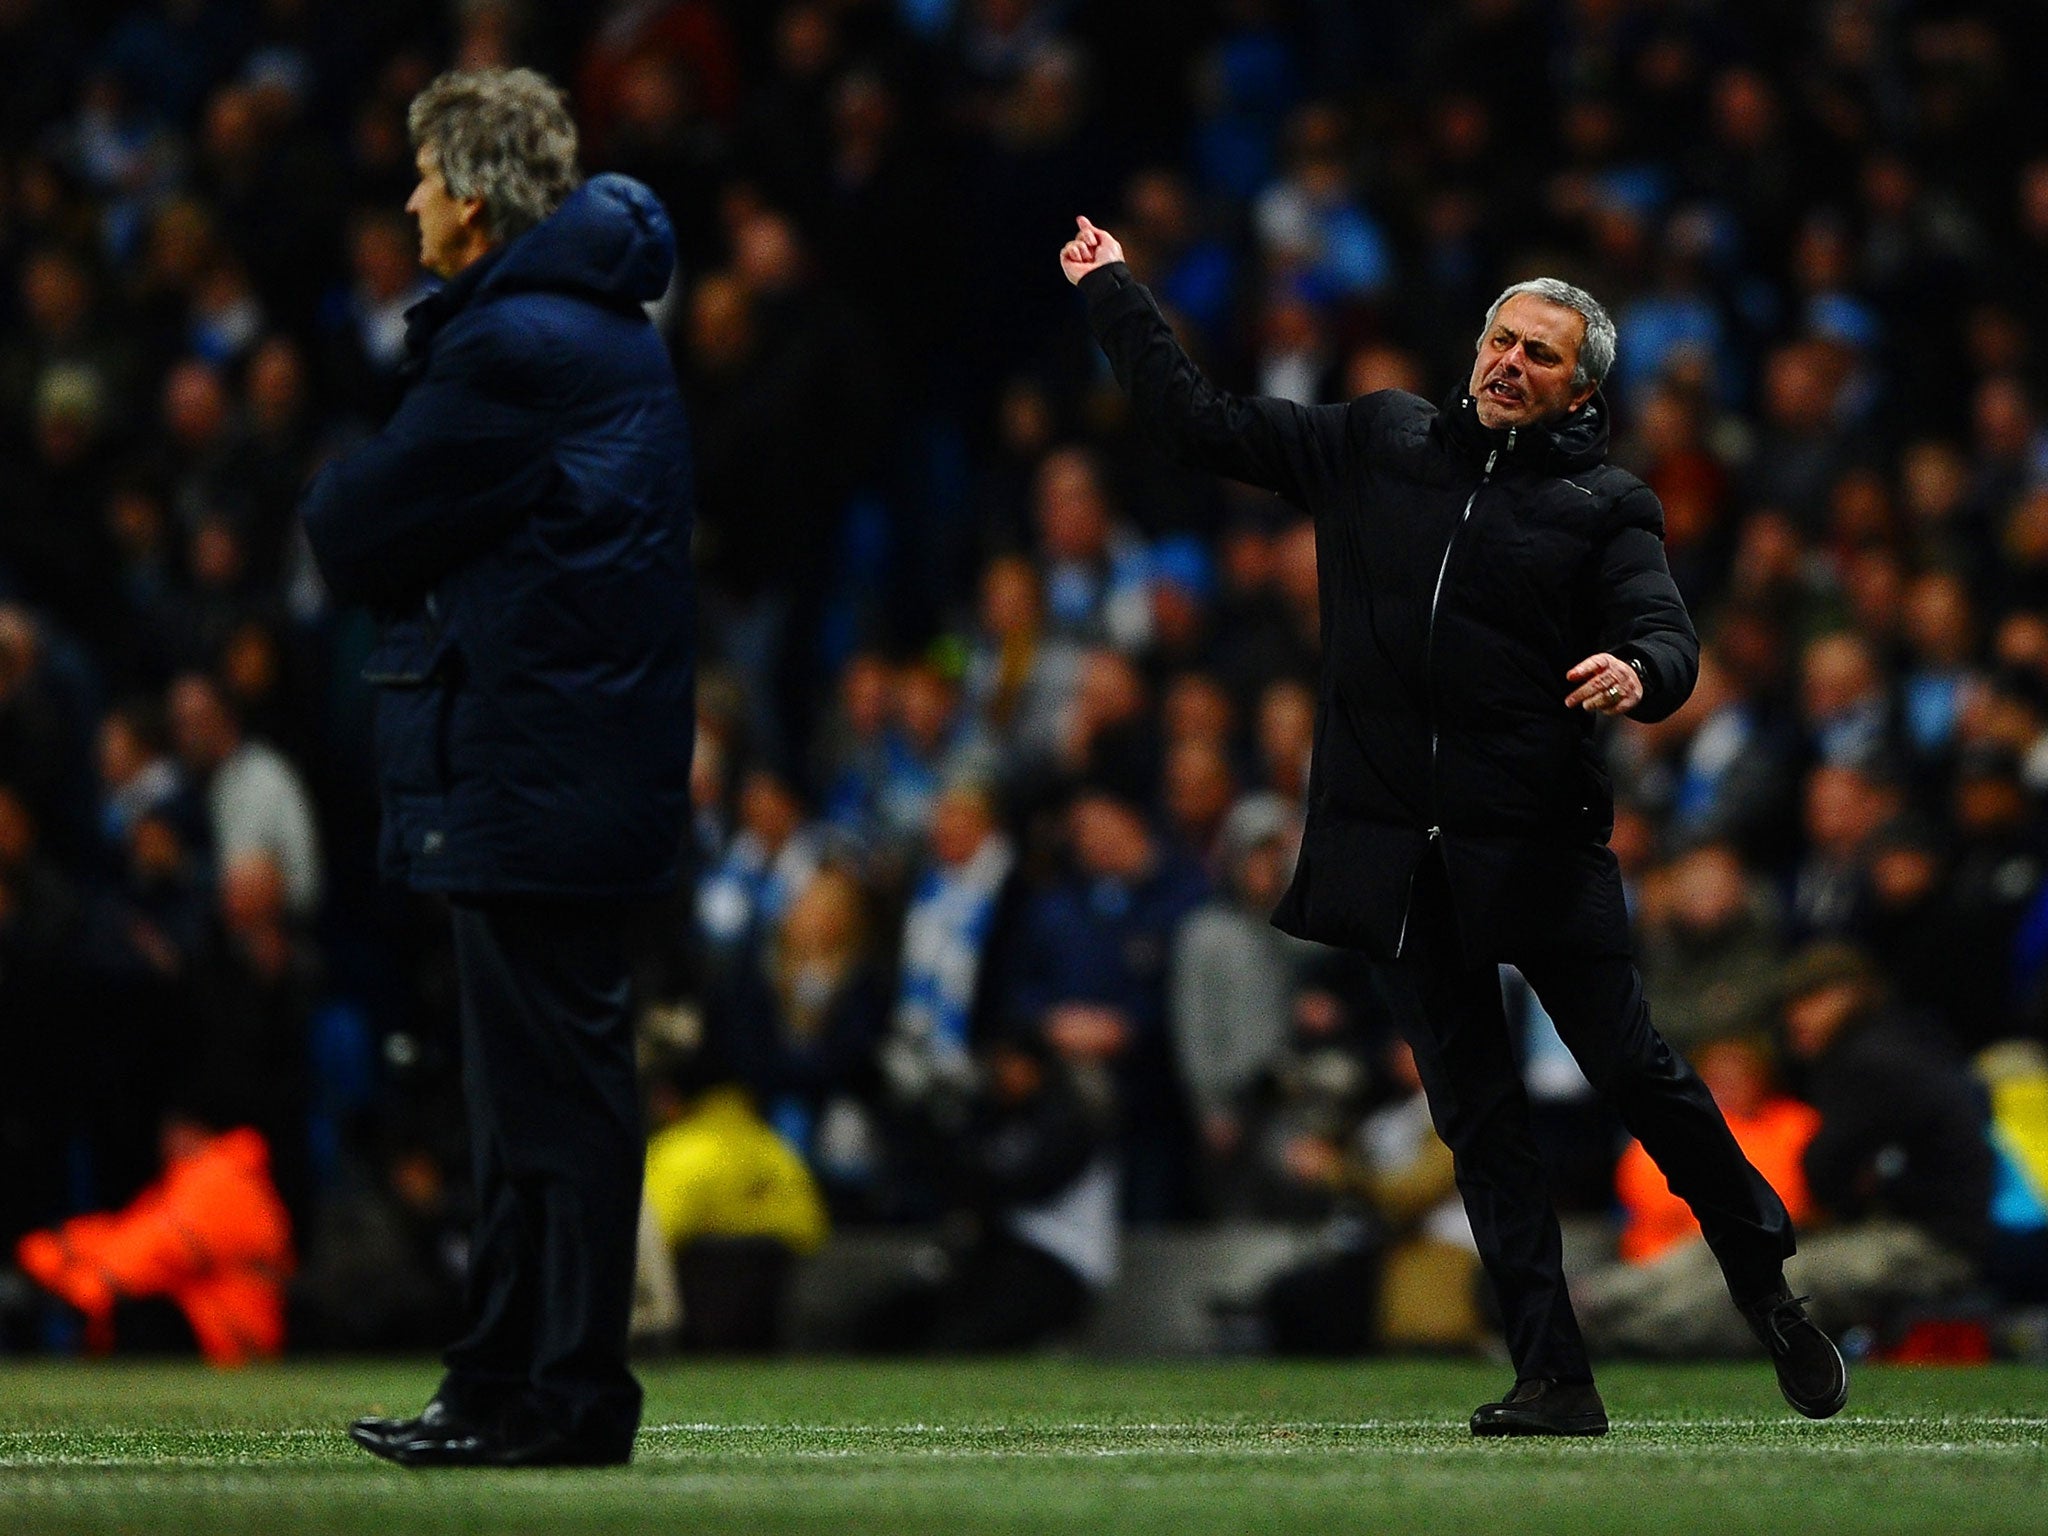 Manuel Pellegrini manager of Manchester City looks on as Jose Mourinho manager of Chelsea reacts during the Barclays Premier League match between Manchester City and Chelsea at Etihad Stadium on February 3, 2014.